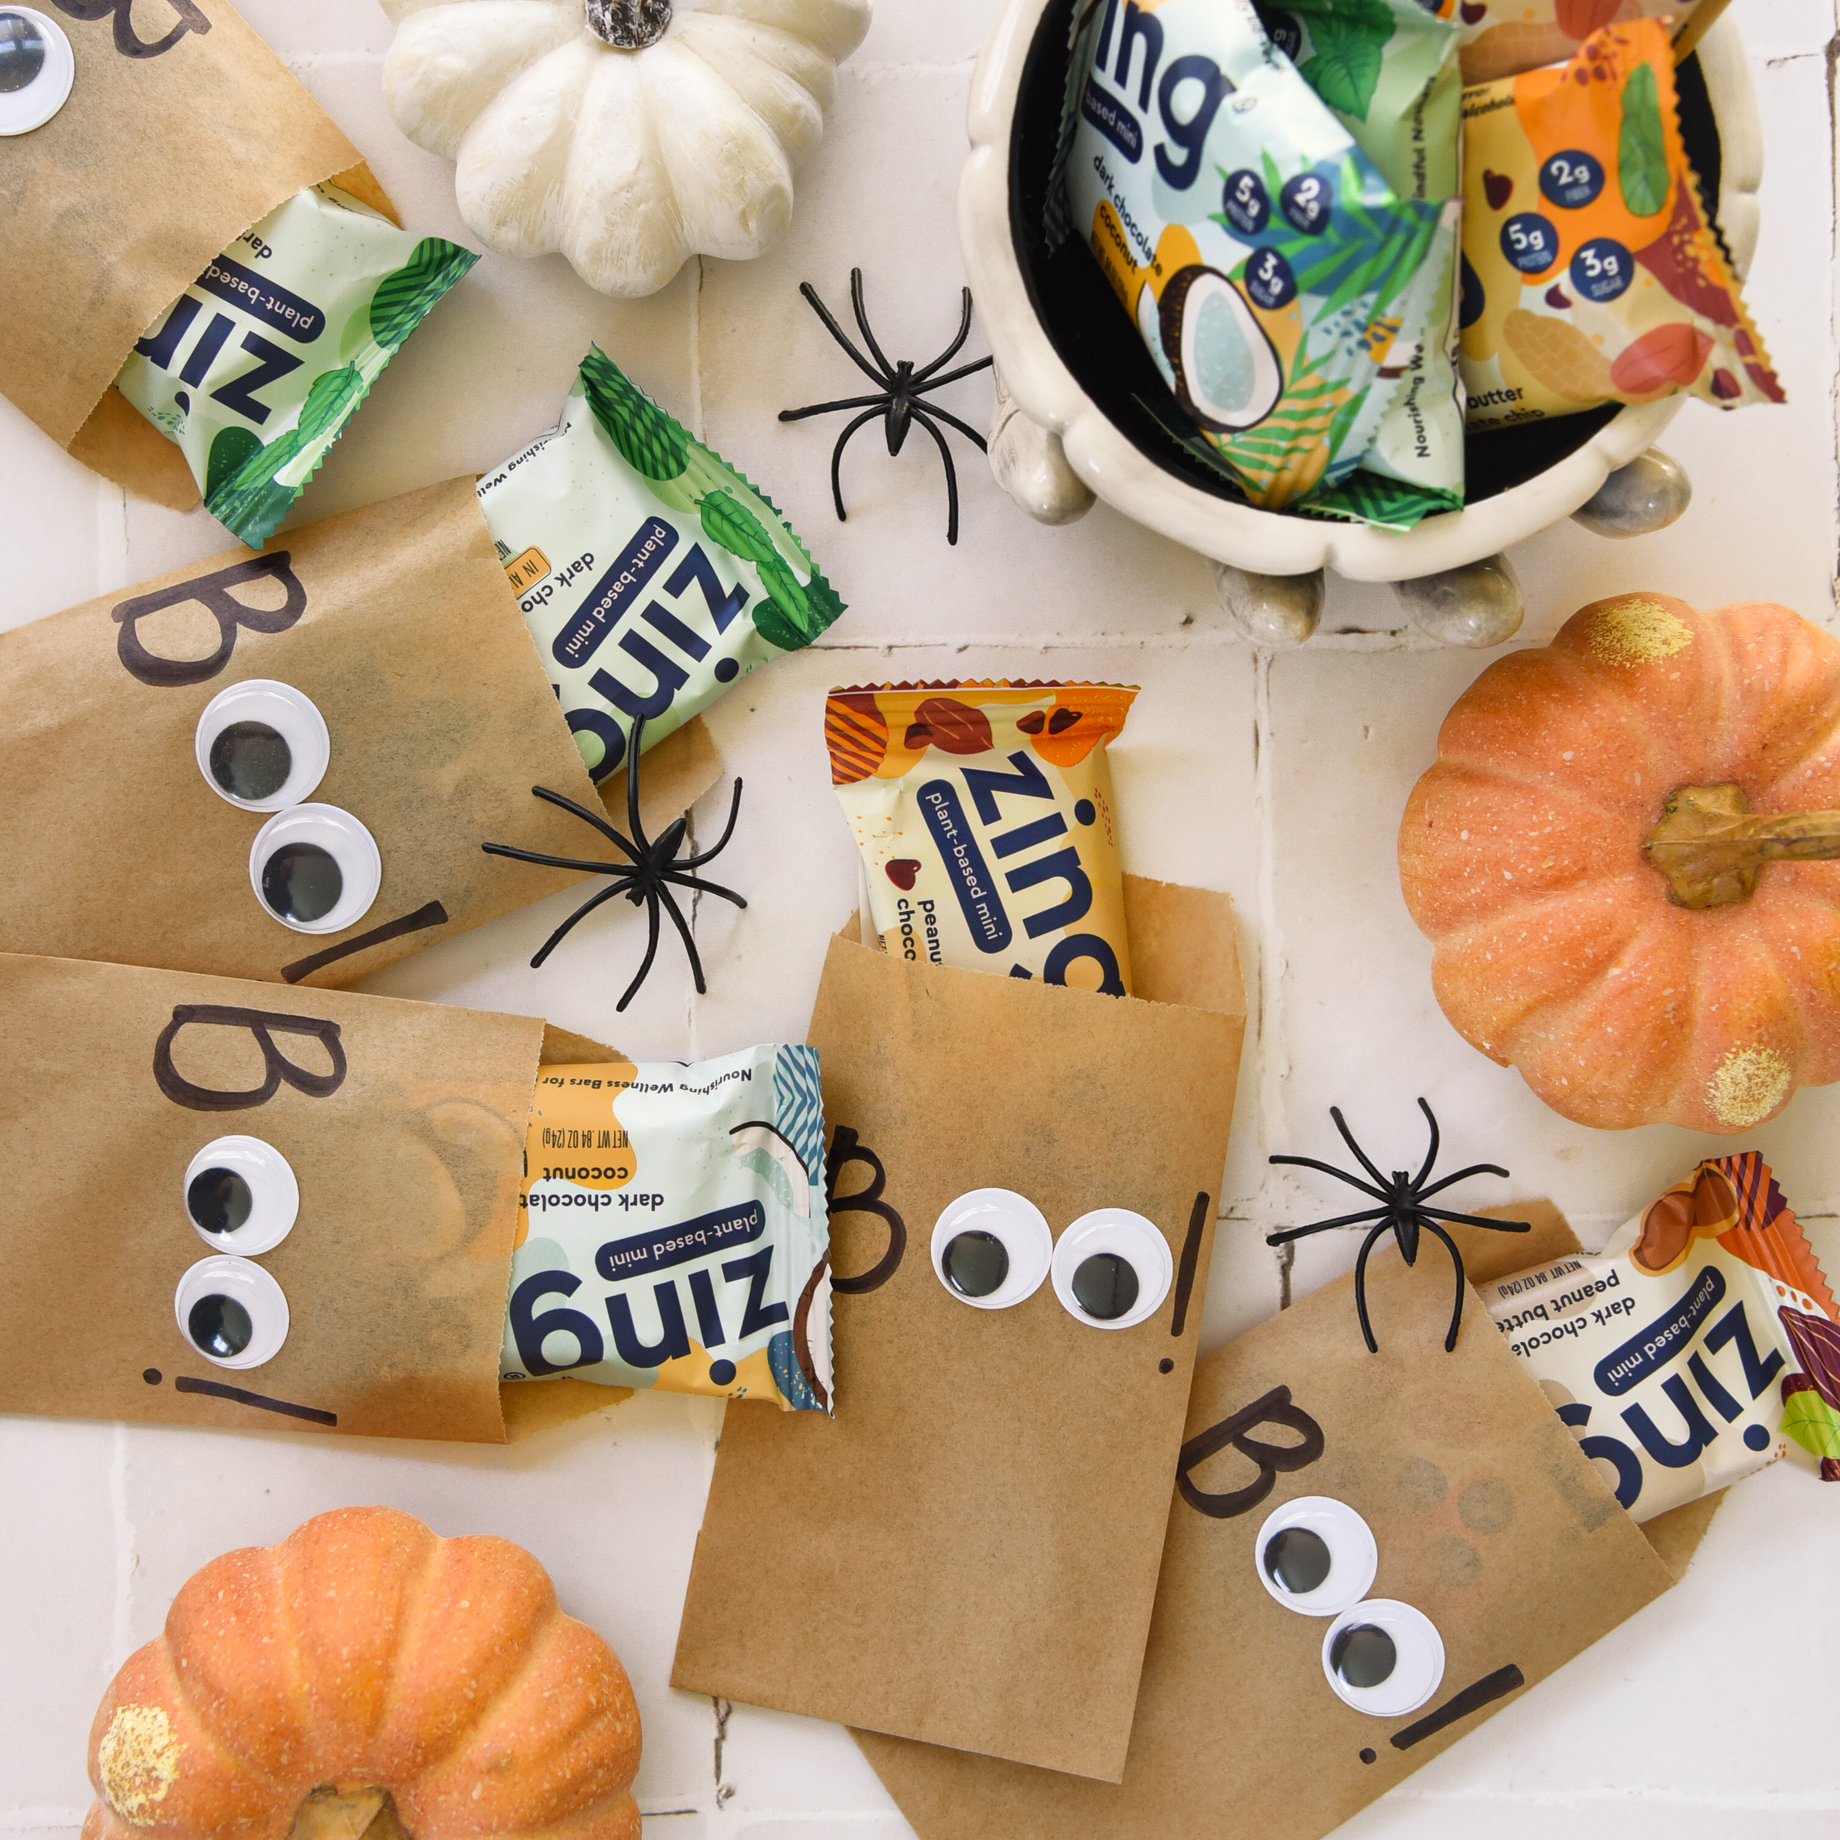 celebrate halloween with a snack you can trust!